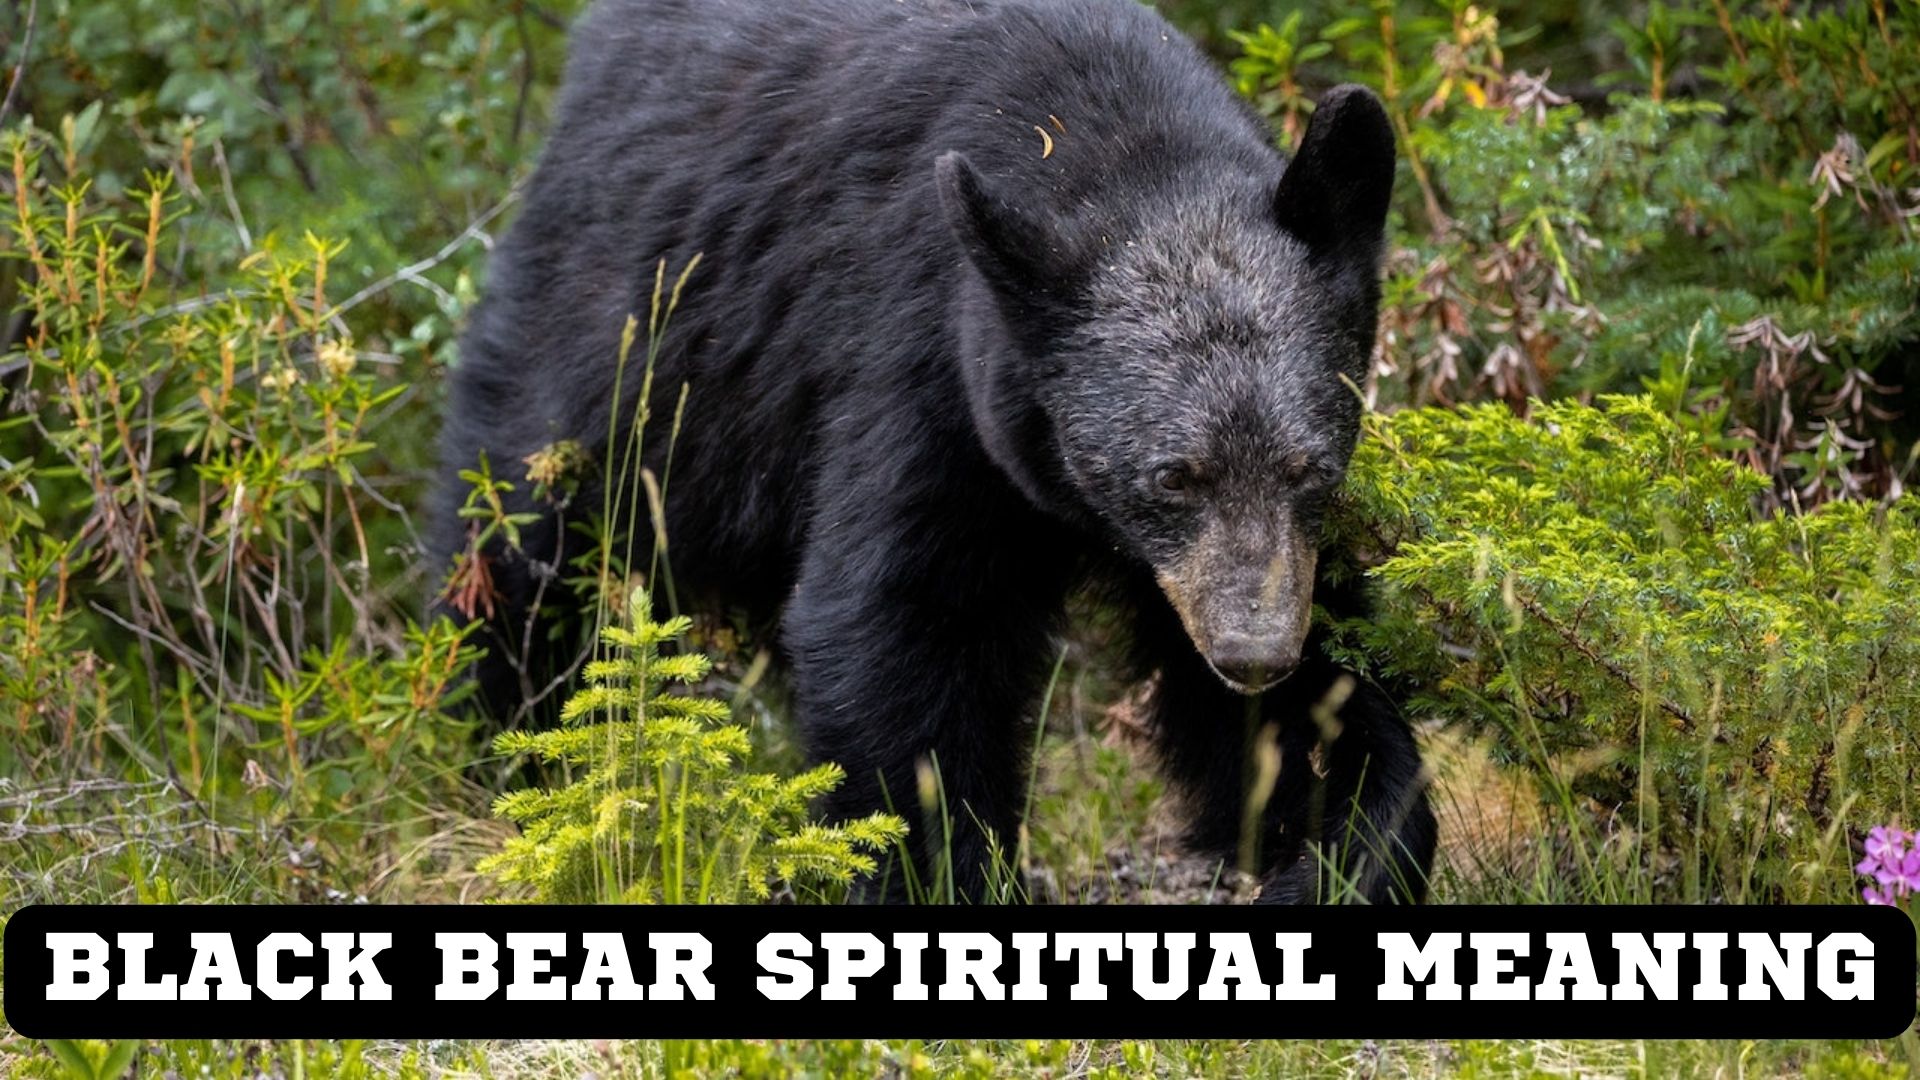 Black Bear Spiritual Meaning - A Symbol Of Patience